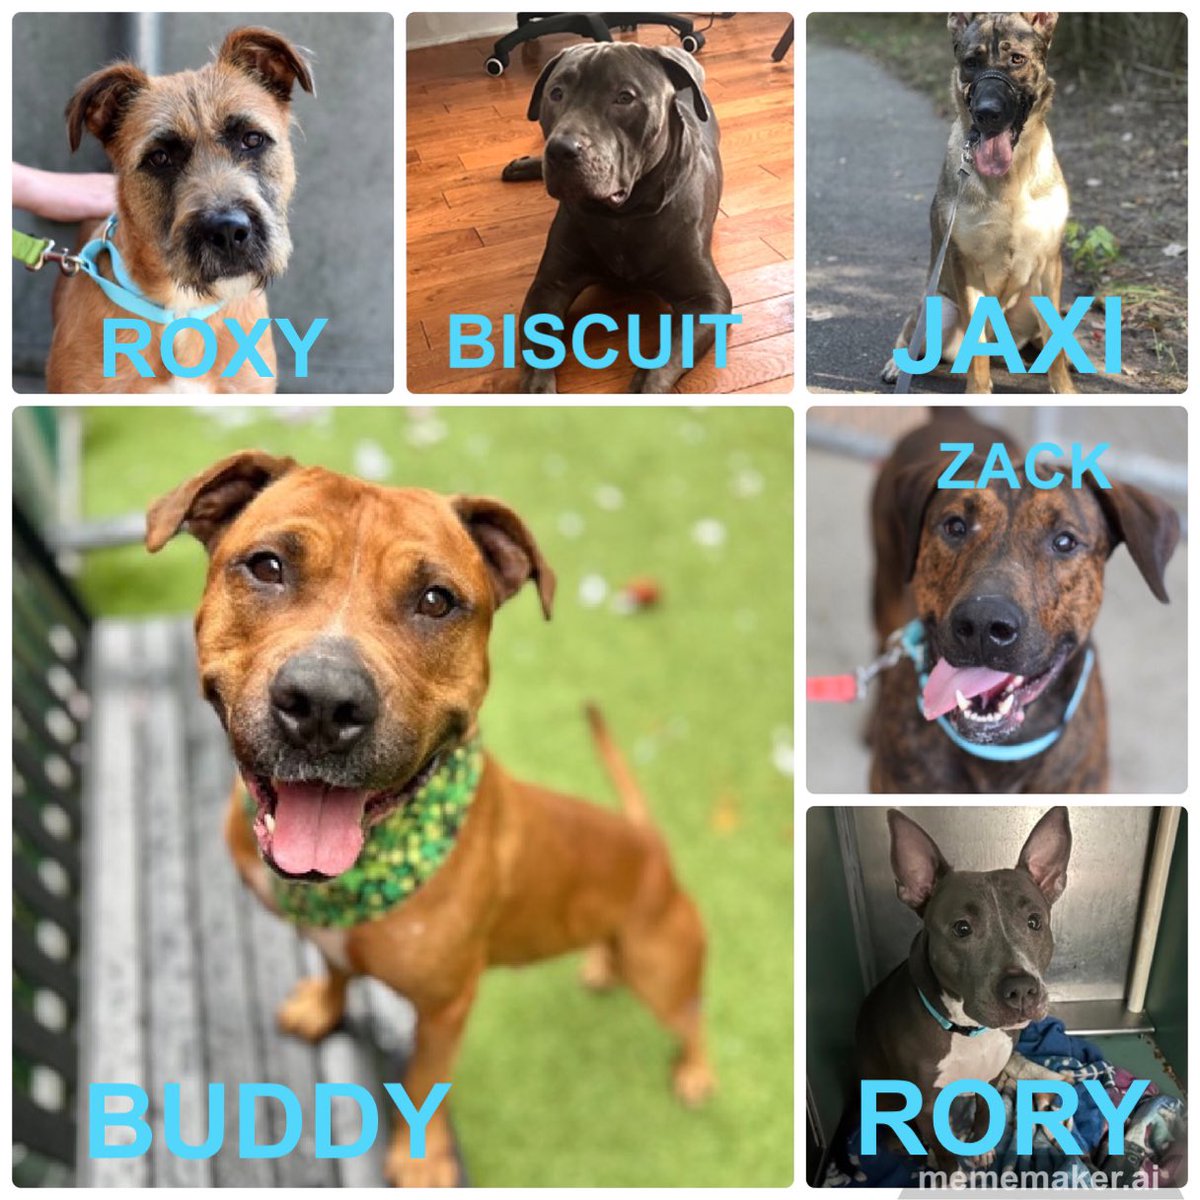 🆘🆘#NYCACC 5/7 KILL ☠️COMMANDS ❤️‍🩹ROXY 1yr. Adoptable ❤️‍🩹BISCUIT 3yrs ❤️‍🩹JAXI 3yrs ❤️‍🩹BUDDY 5yrs Adoptable ❤️‍🩹ZACK 4yrs ❤️‍🩹RORY 2yrs PLEASE #PLEDGE #FOSTER #ADOPT 📧nycdogslivesmatter@gmail.com DM @notthesameone2 #FostersSaveLives